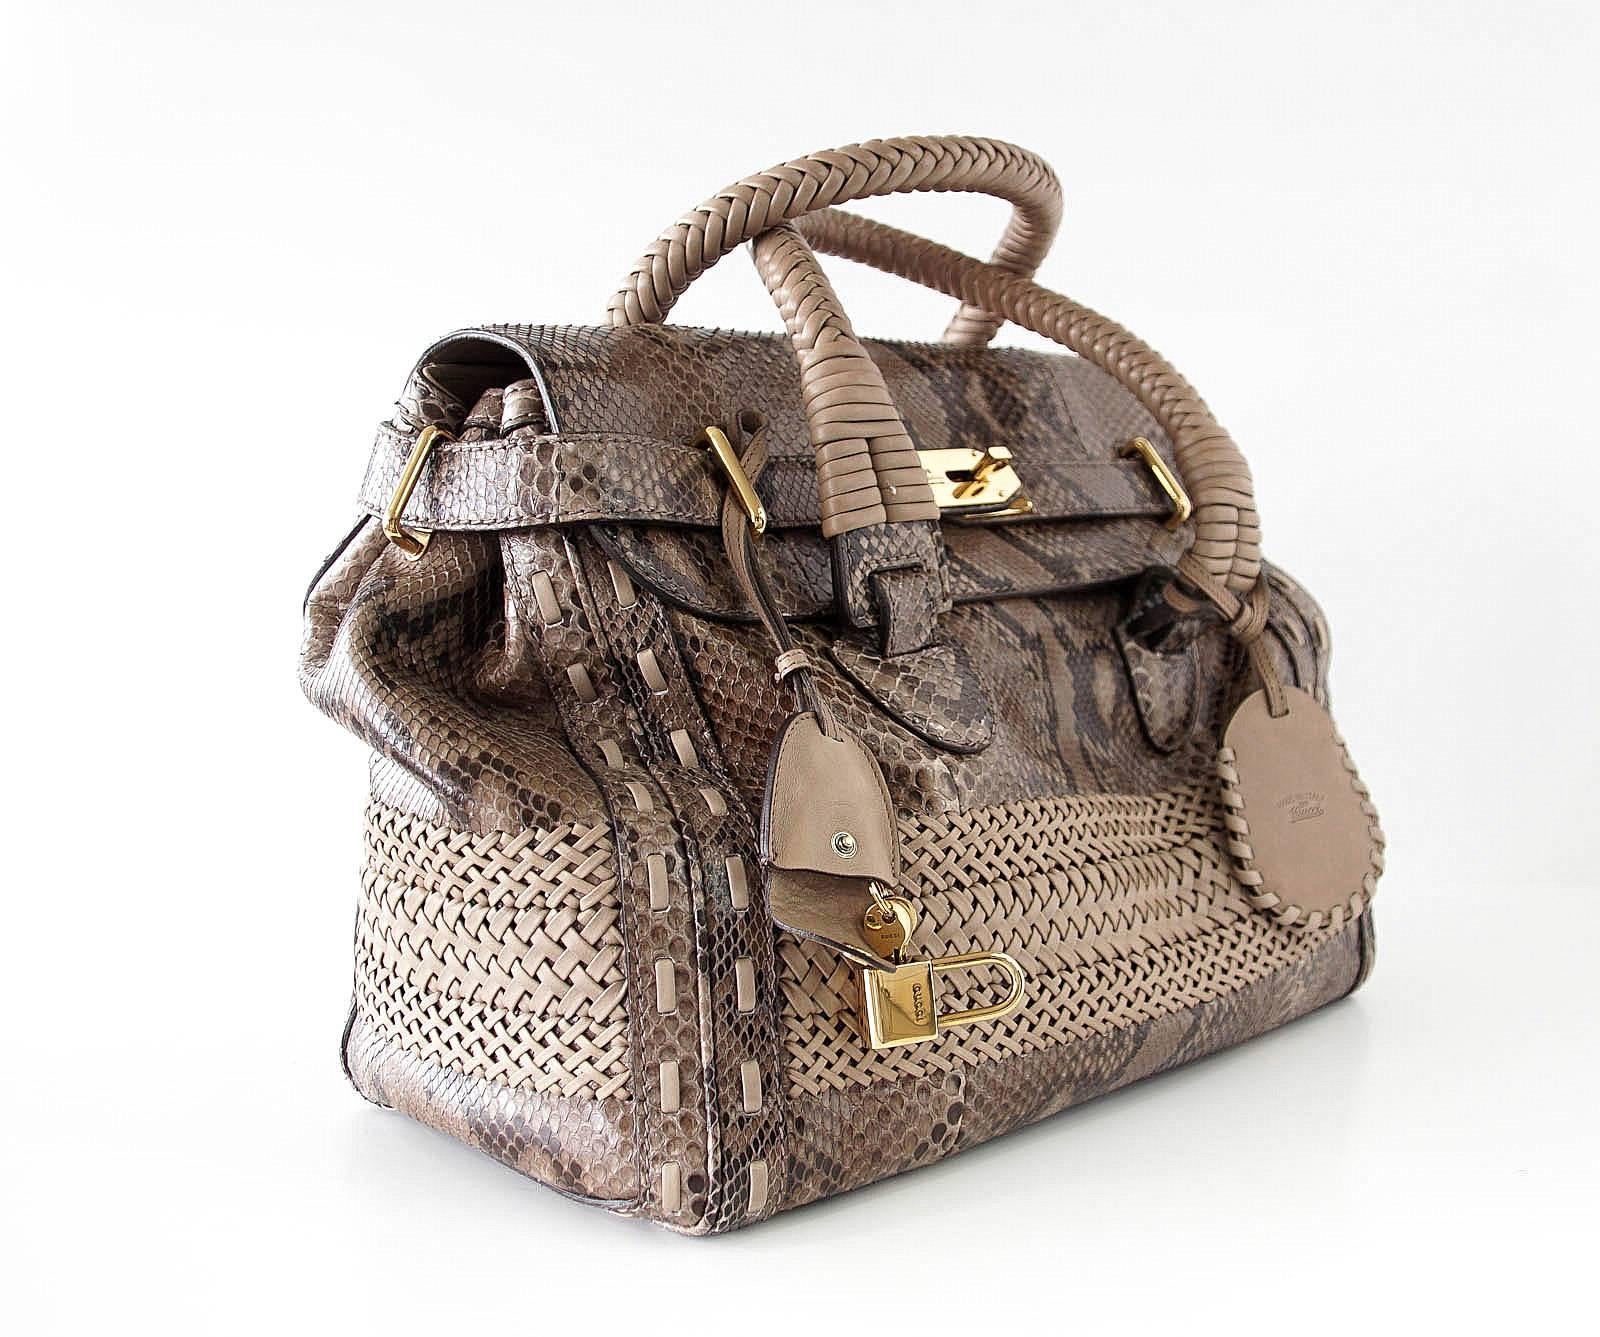 Guaranteed authentic GUCCI taupe snakeskin bag.
Taupe snakeskin bag with woven leather detail.
Woven leather handles.
Top flap closure with 2 straps around front.
Embossed gold hardware and lock.
Handles have clochette with keys and luggage